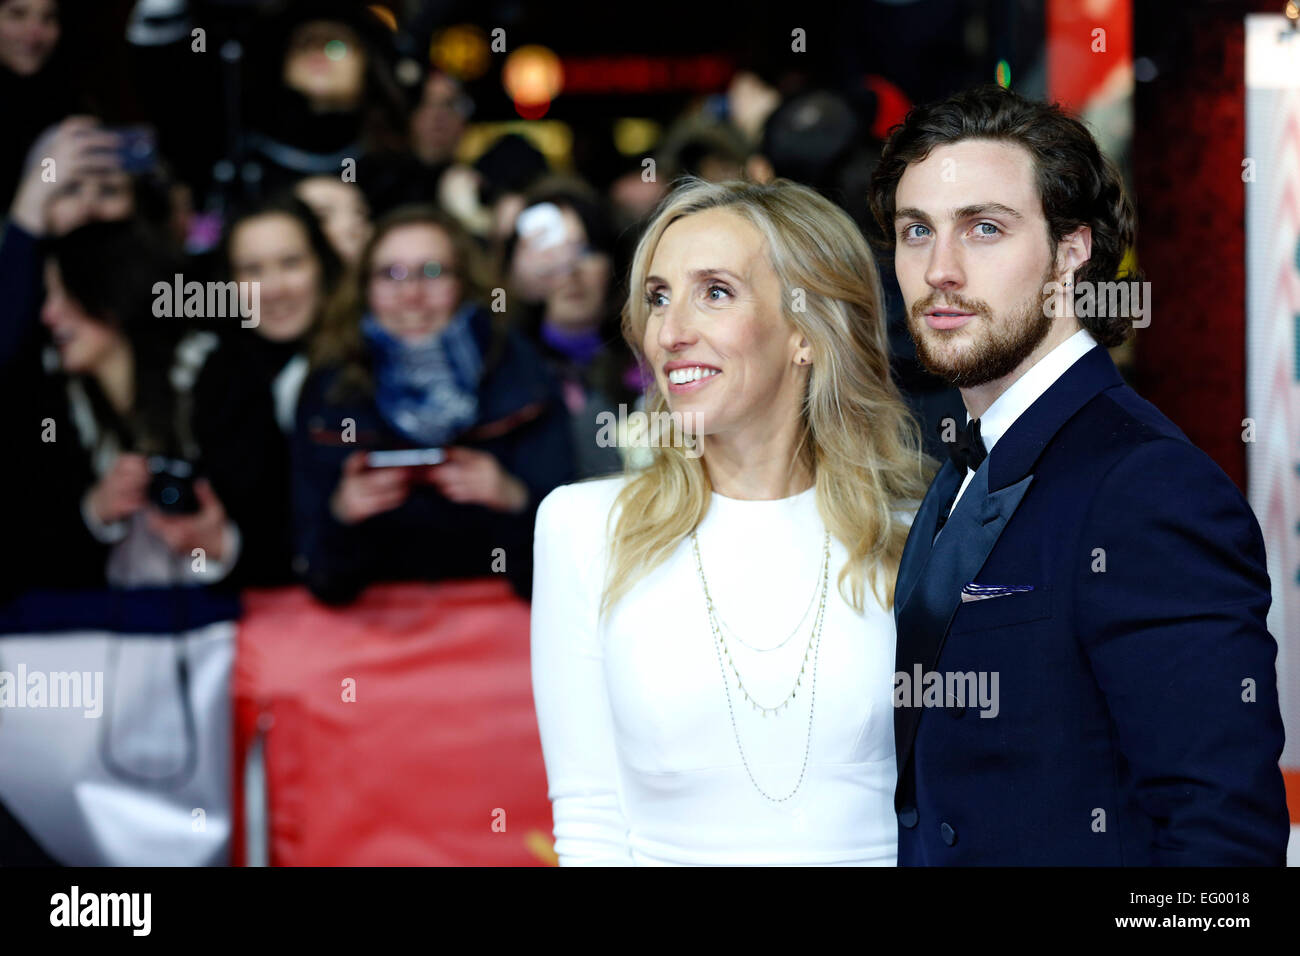 Sam Taylor-Johnson and Aaron Taylor-Johnson attending the 'Fifty Shades Of Grey' premiere at the 65th Berlin International Film Festival/Berlinale 2015 on February 11, 2015./picture alliance Stock Photo